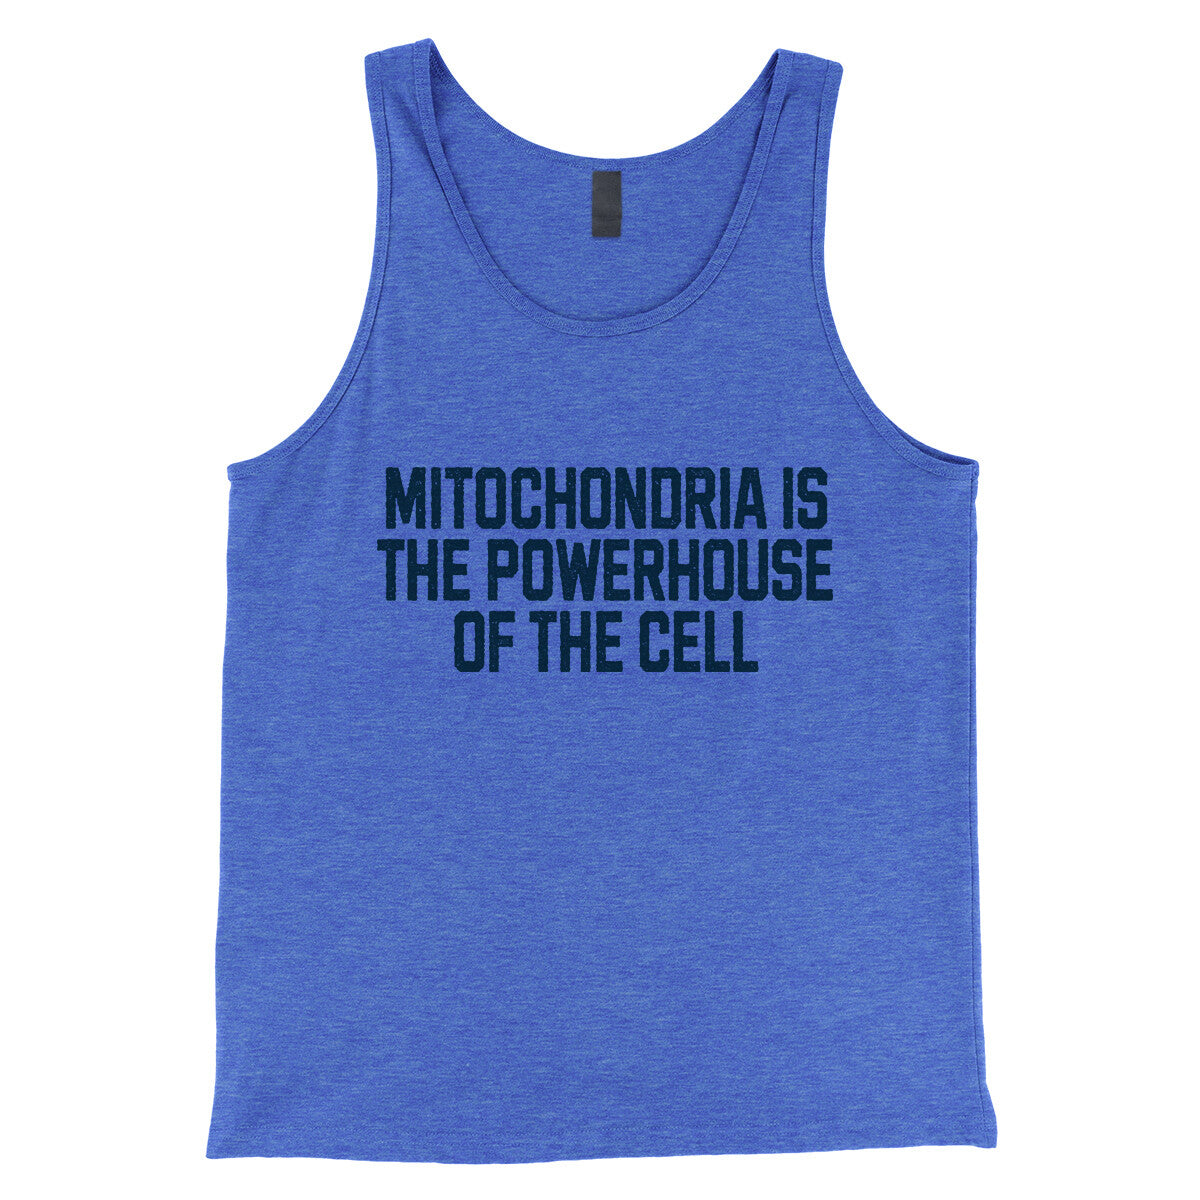 Mitochondria is the Powerhouse of the Cell in True Royal TriBlend Color